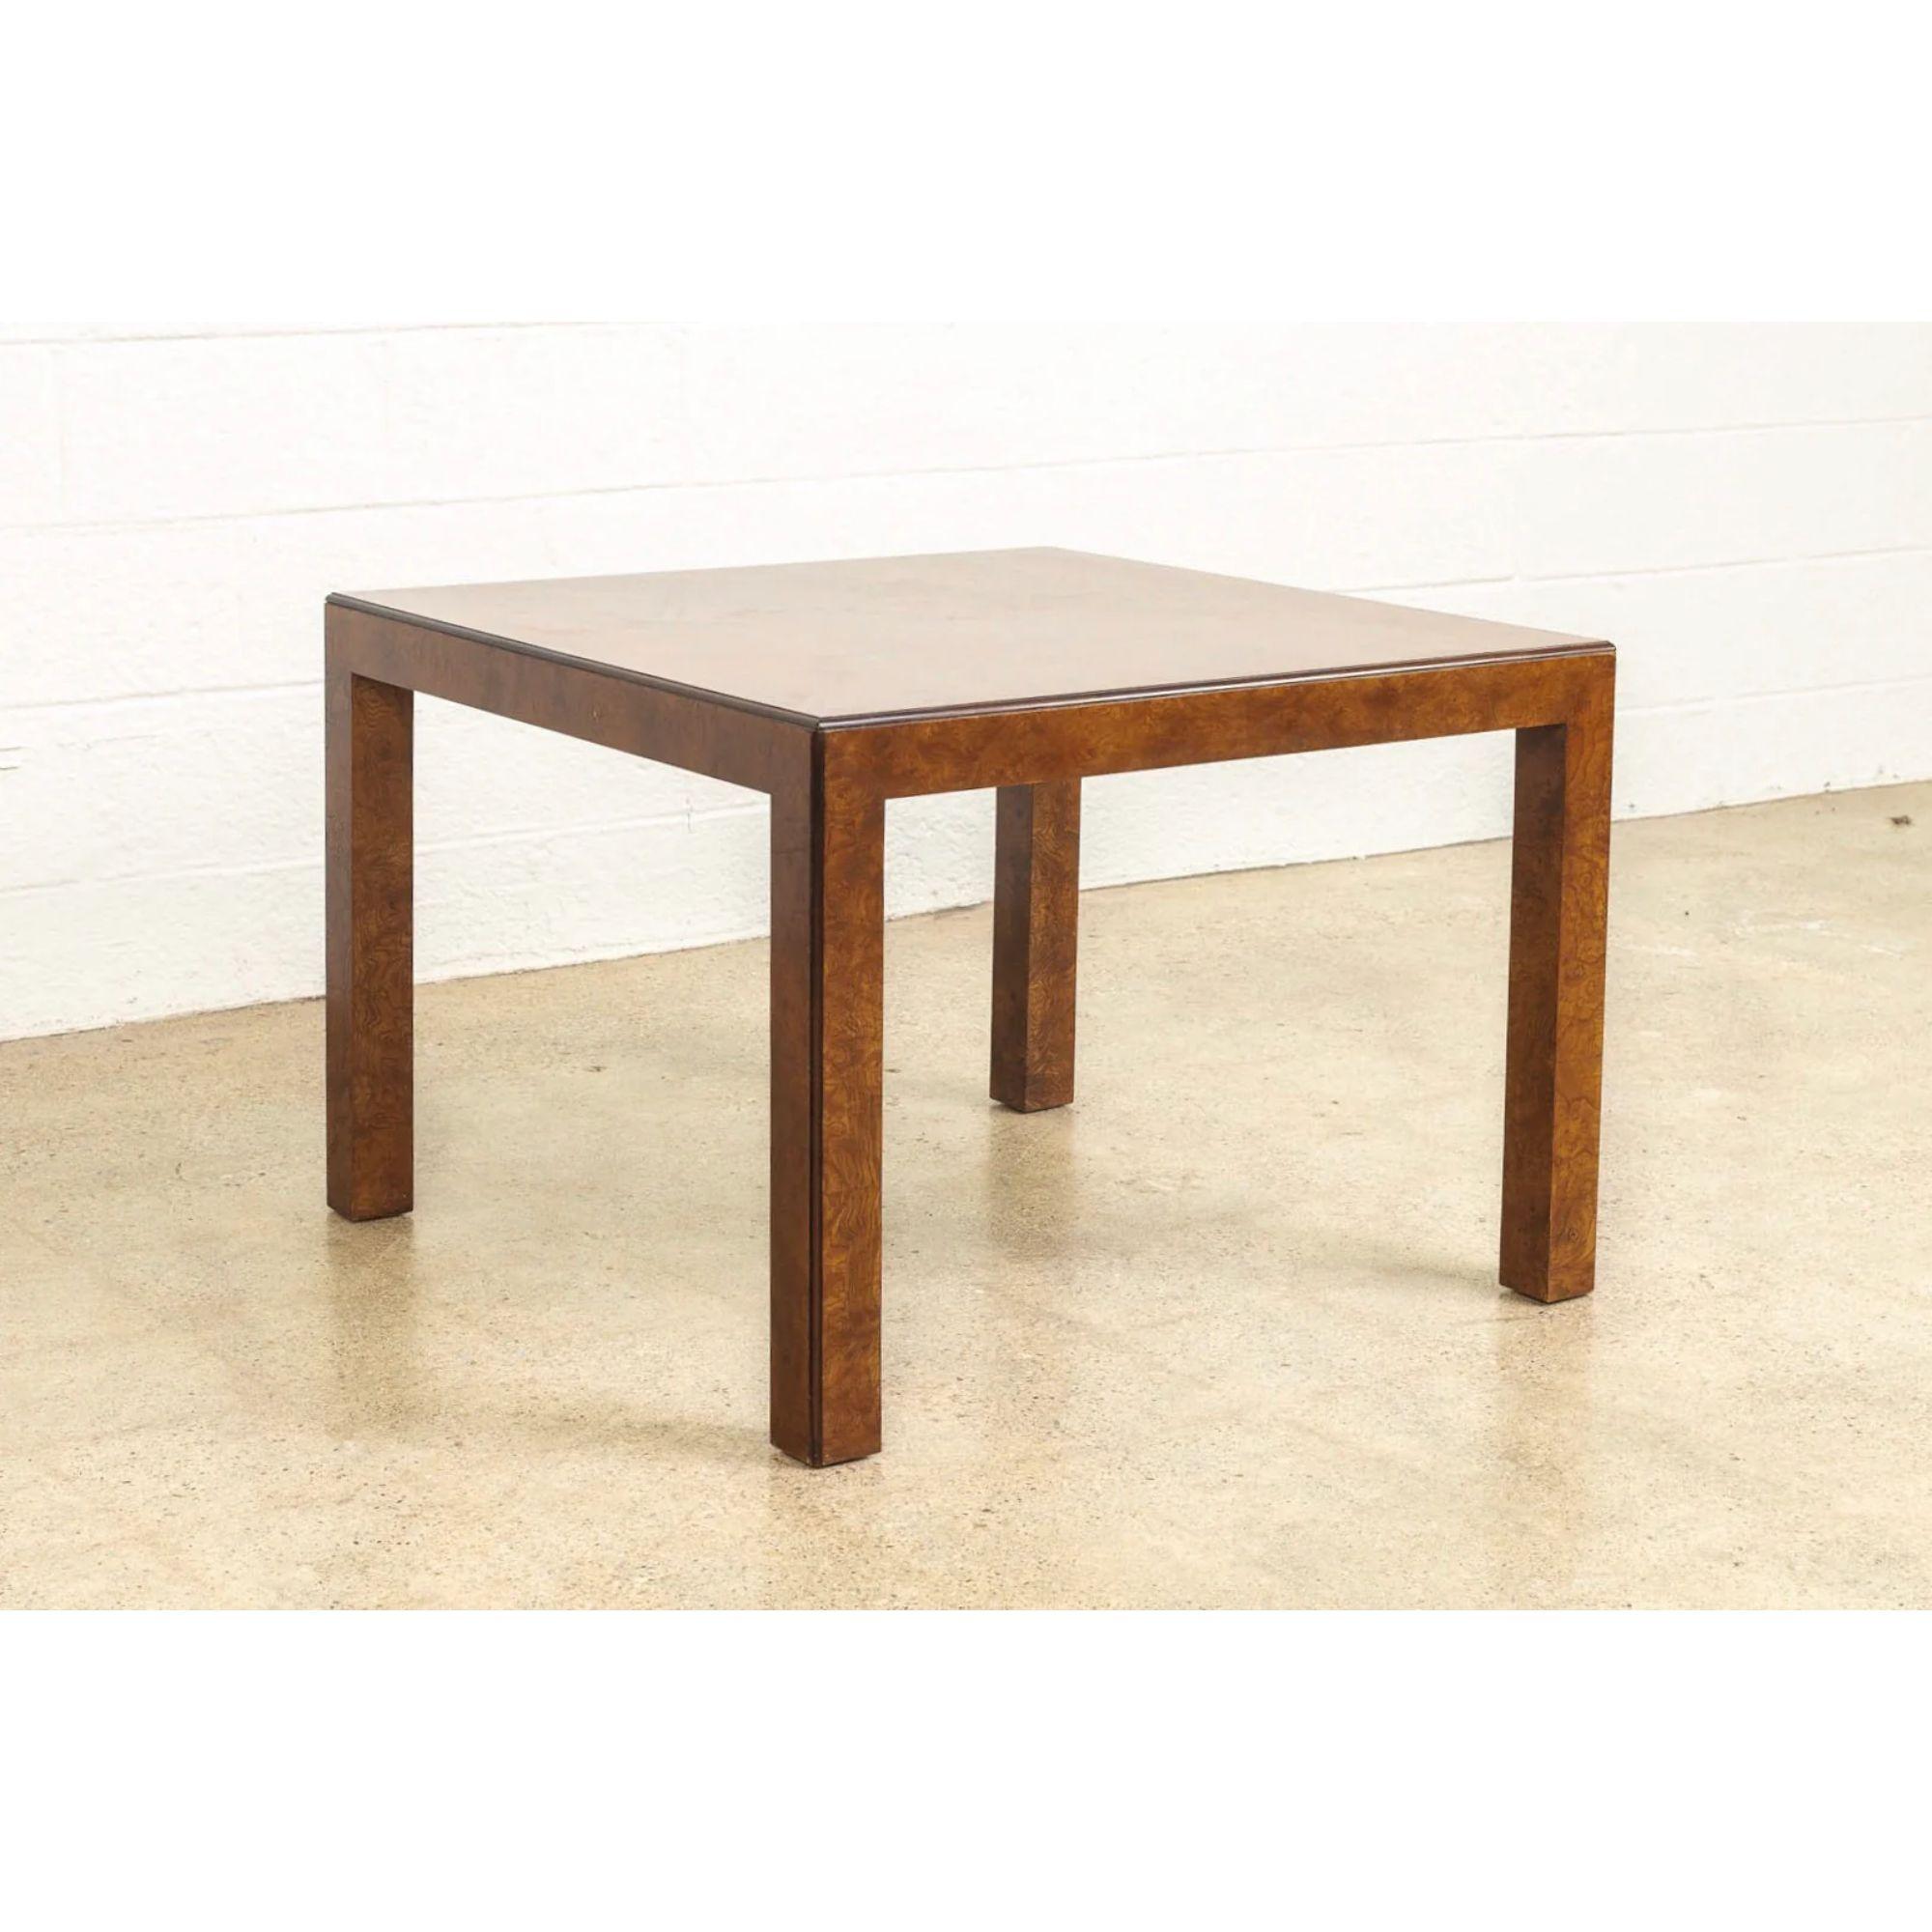 This Mid-Century Modern John Widdicomb Square burl wood coffee or occasional table circa 1970 features a classic minimalist design with clean geometric lines. The table is well-constructed from solid burl wood and the elegant unimposing design